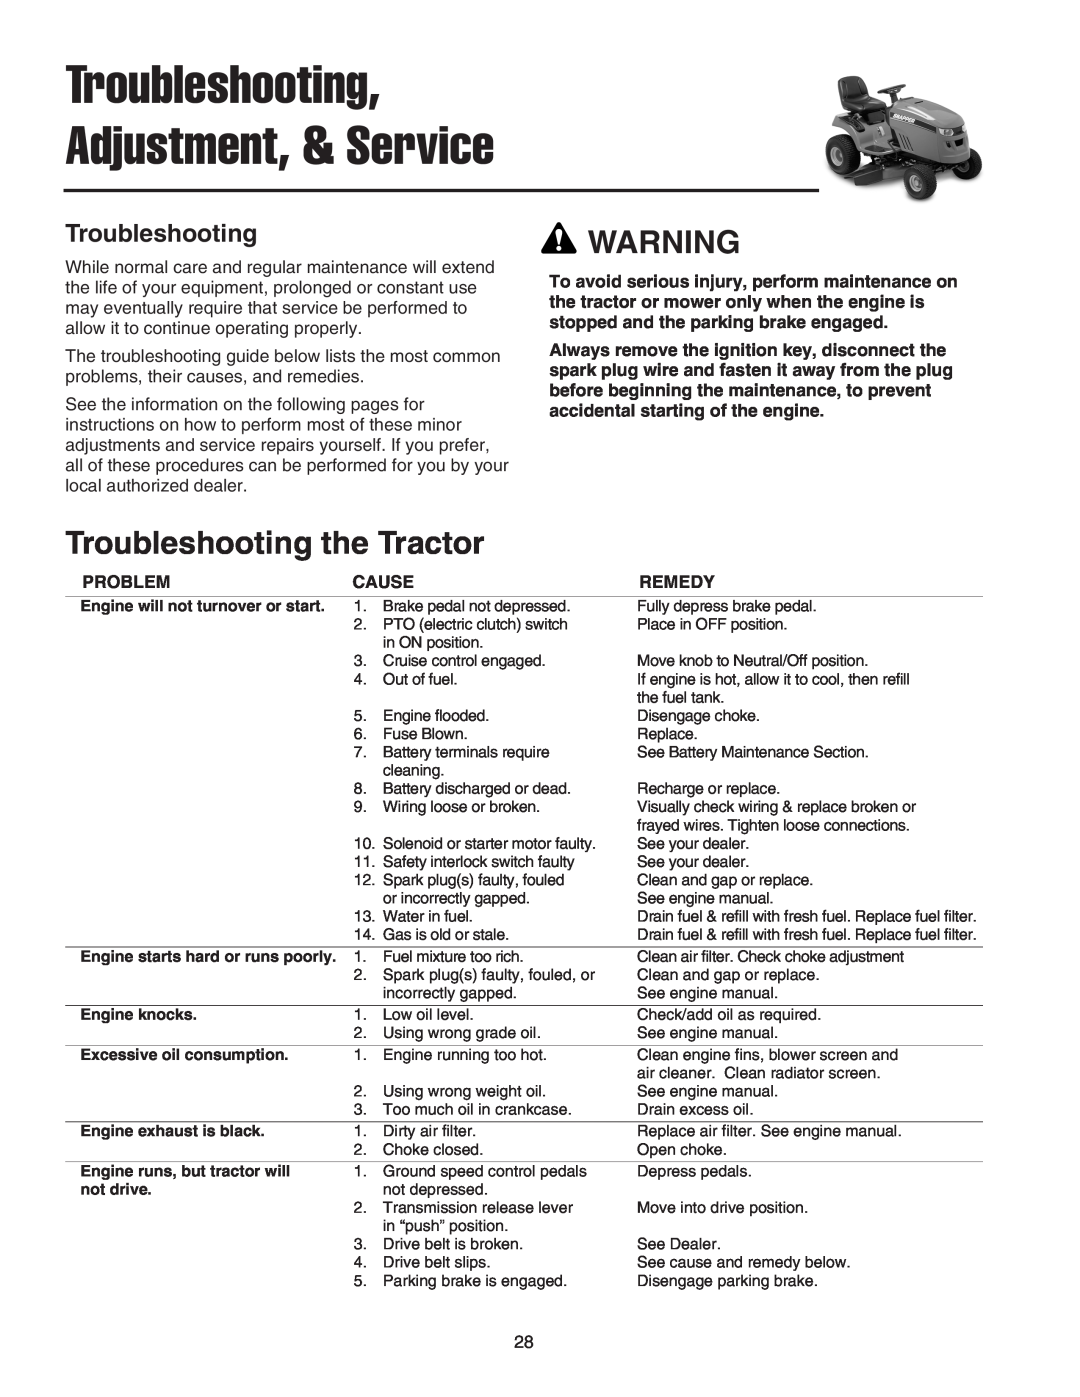 Snapper LT-200 manual Troubleshooting Adjustment, & Service, Troubleshooting the Tractor 